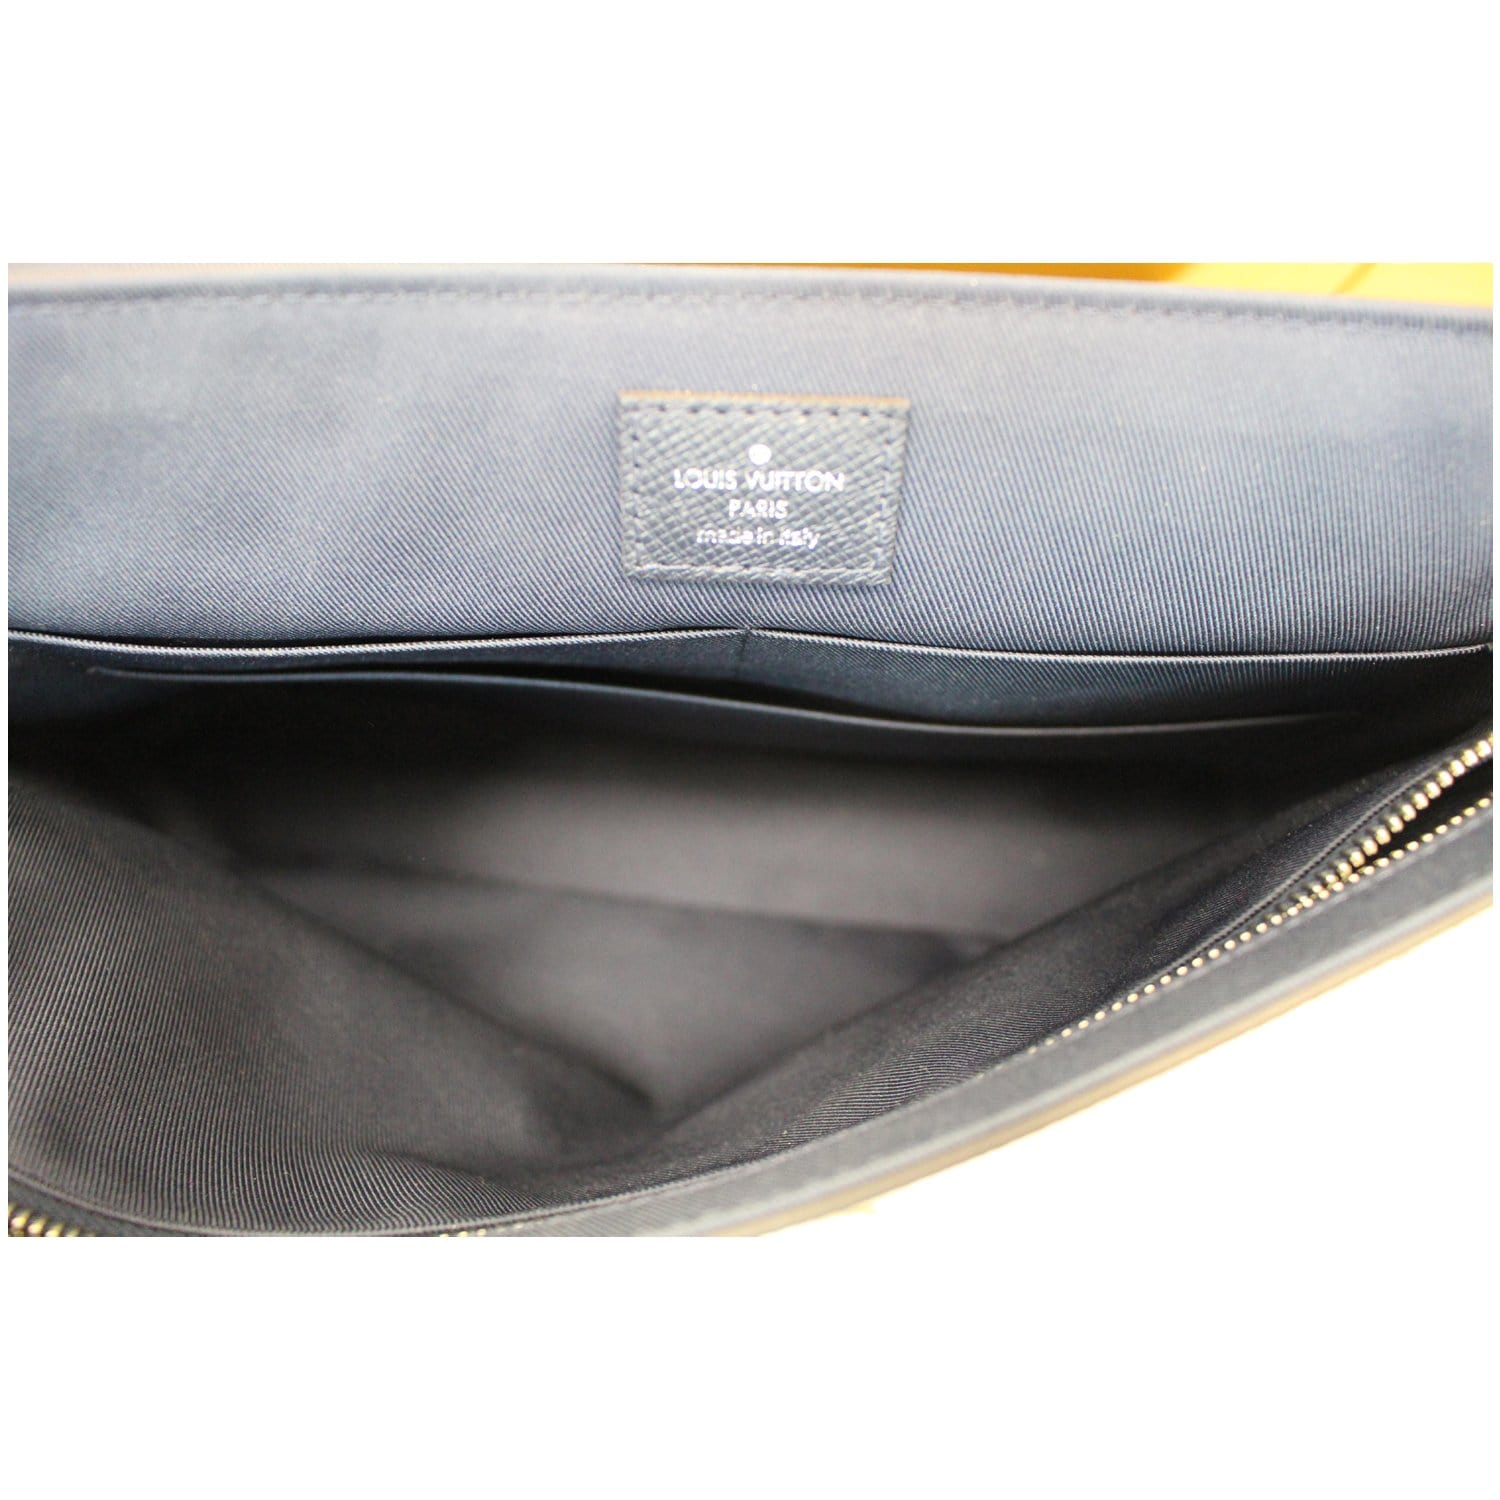 District PM Taiga Leather - Bags